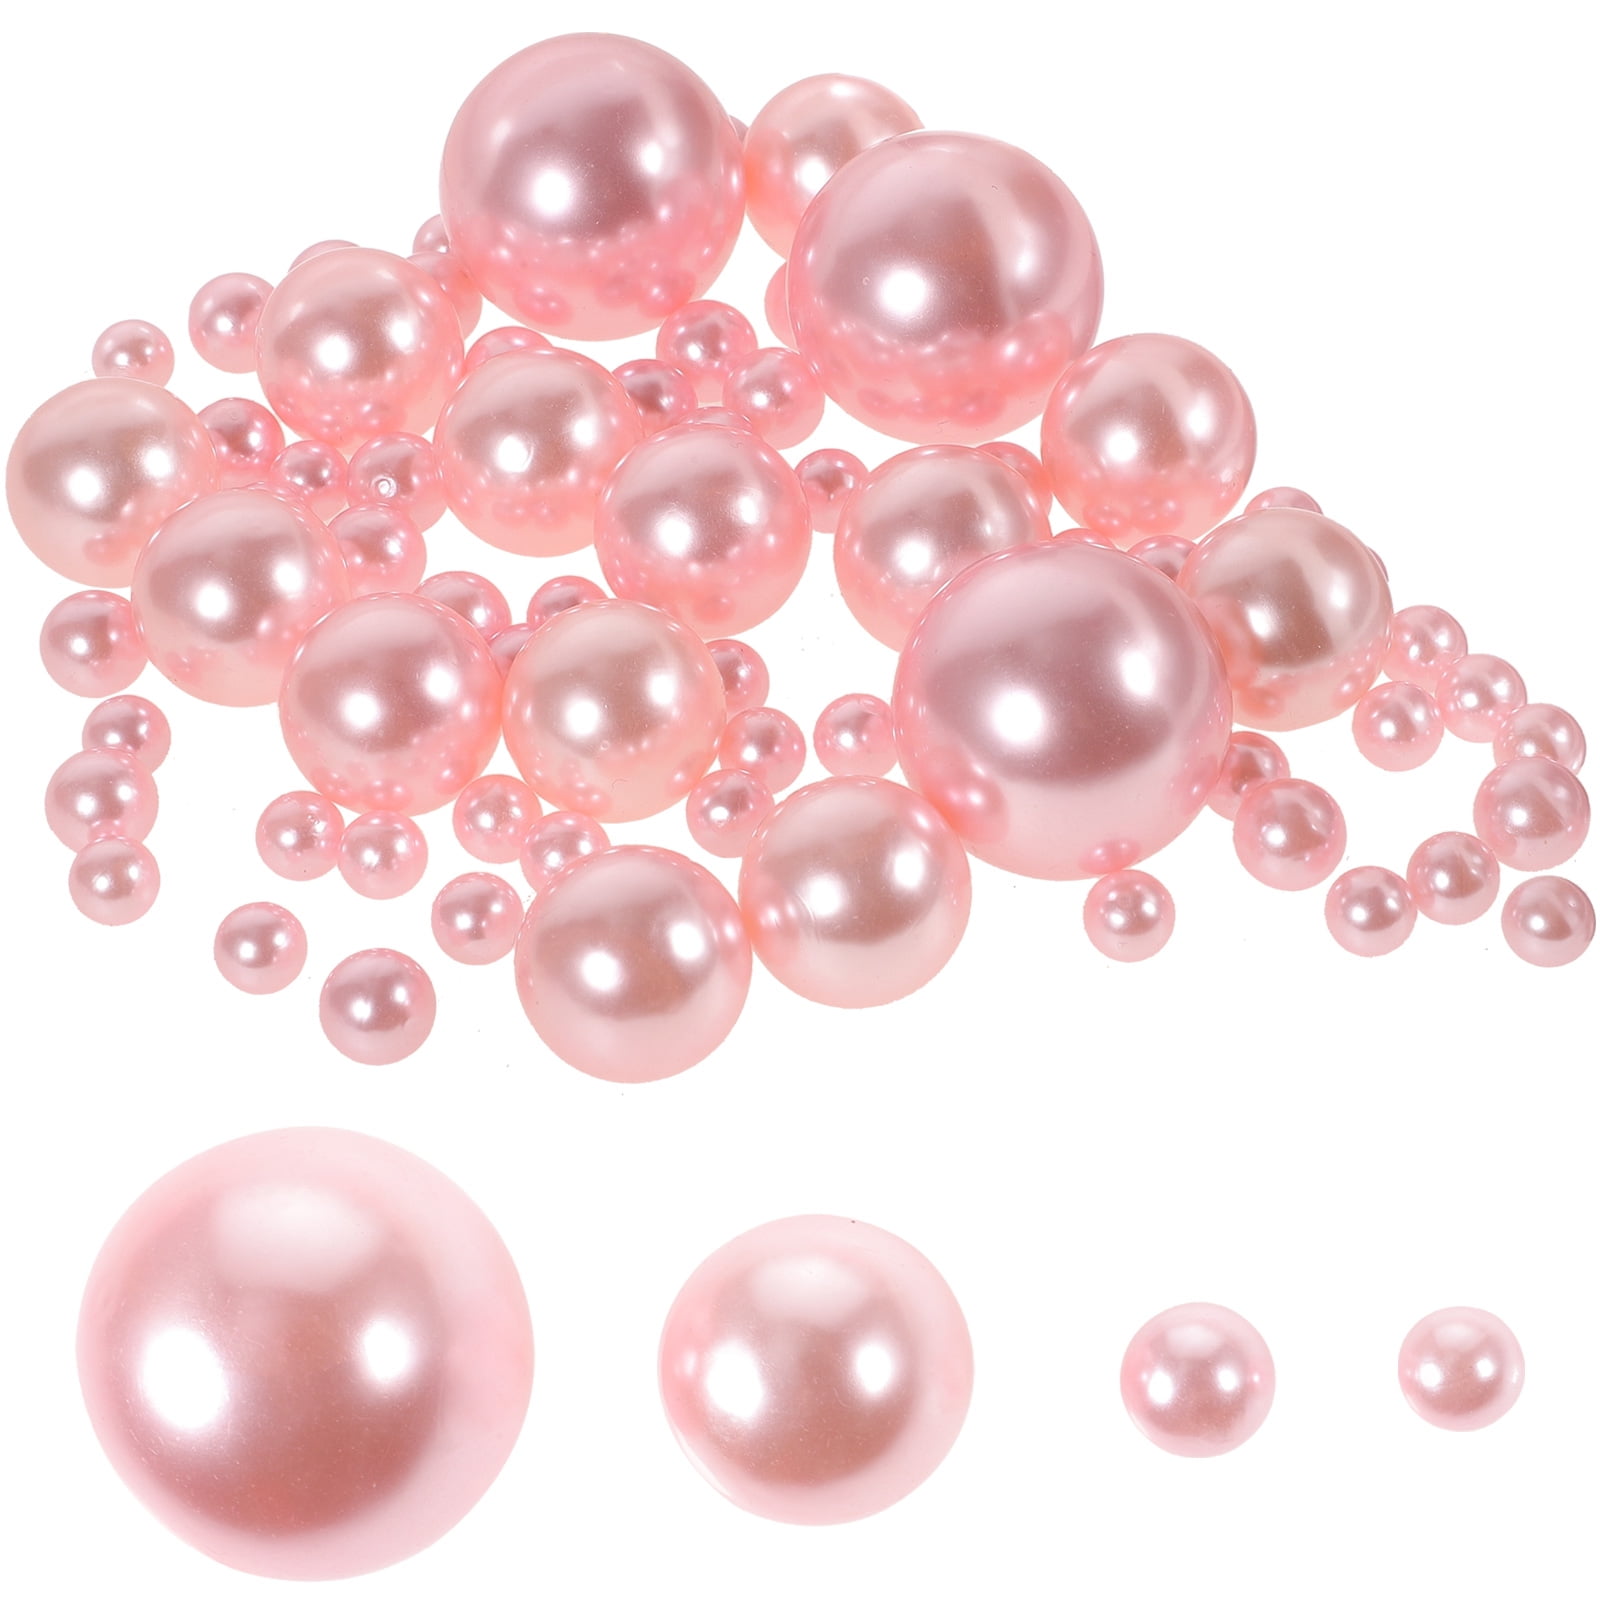 125pcs No Hole Fake Pearls Diy Fake Pearls Candle Cup Filing Floating  Pearls Wedding Party Decor 